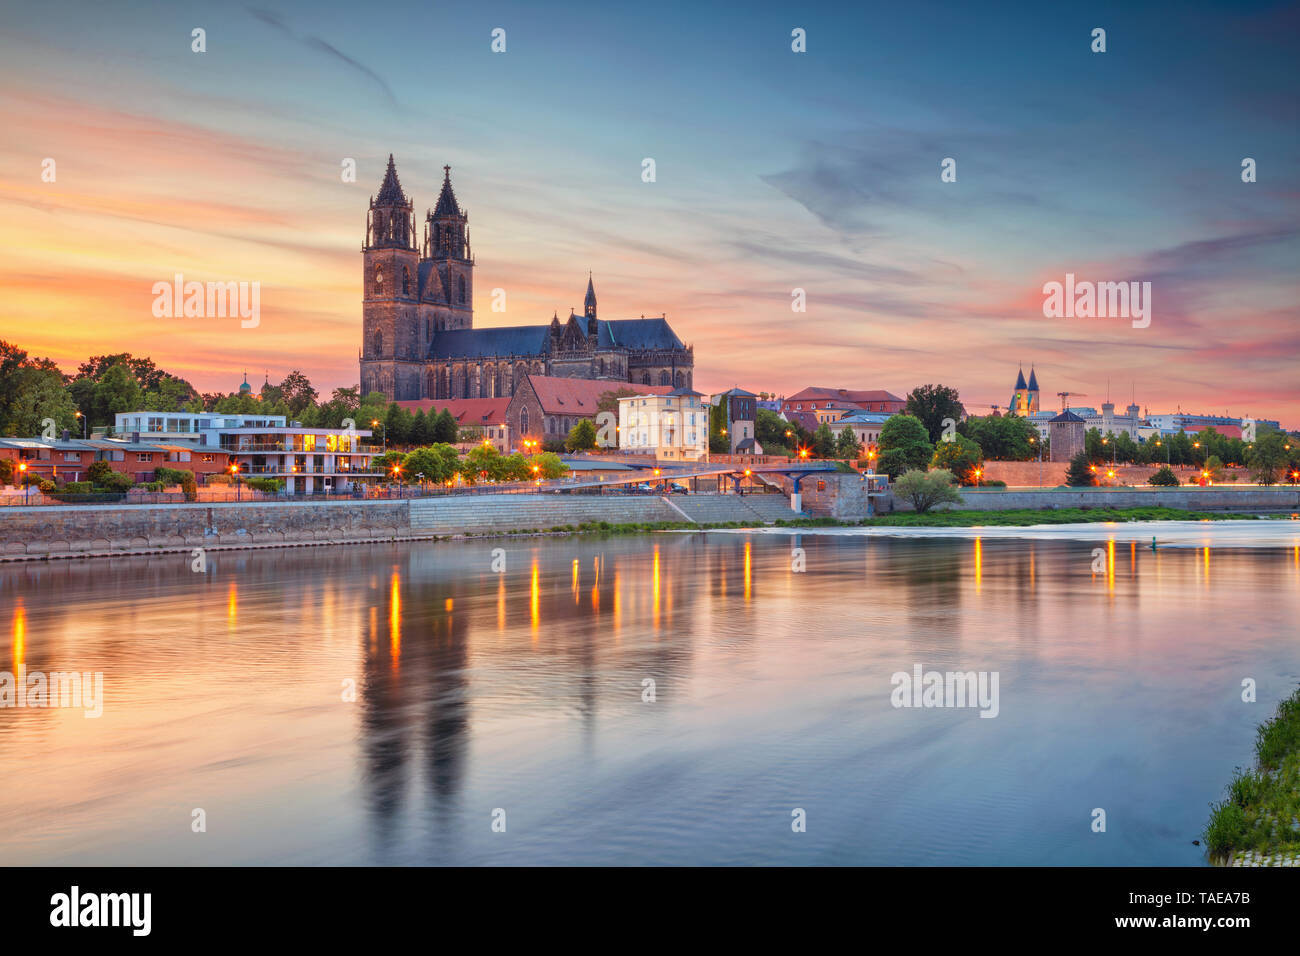 Magdeburg, Germany. Cityscape image of Magdeburg, Germany with reflection of the city in the Elbe river, during sunset. Stock Photo